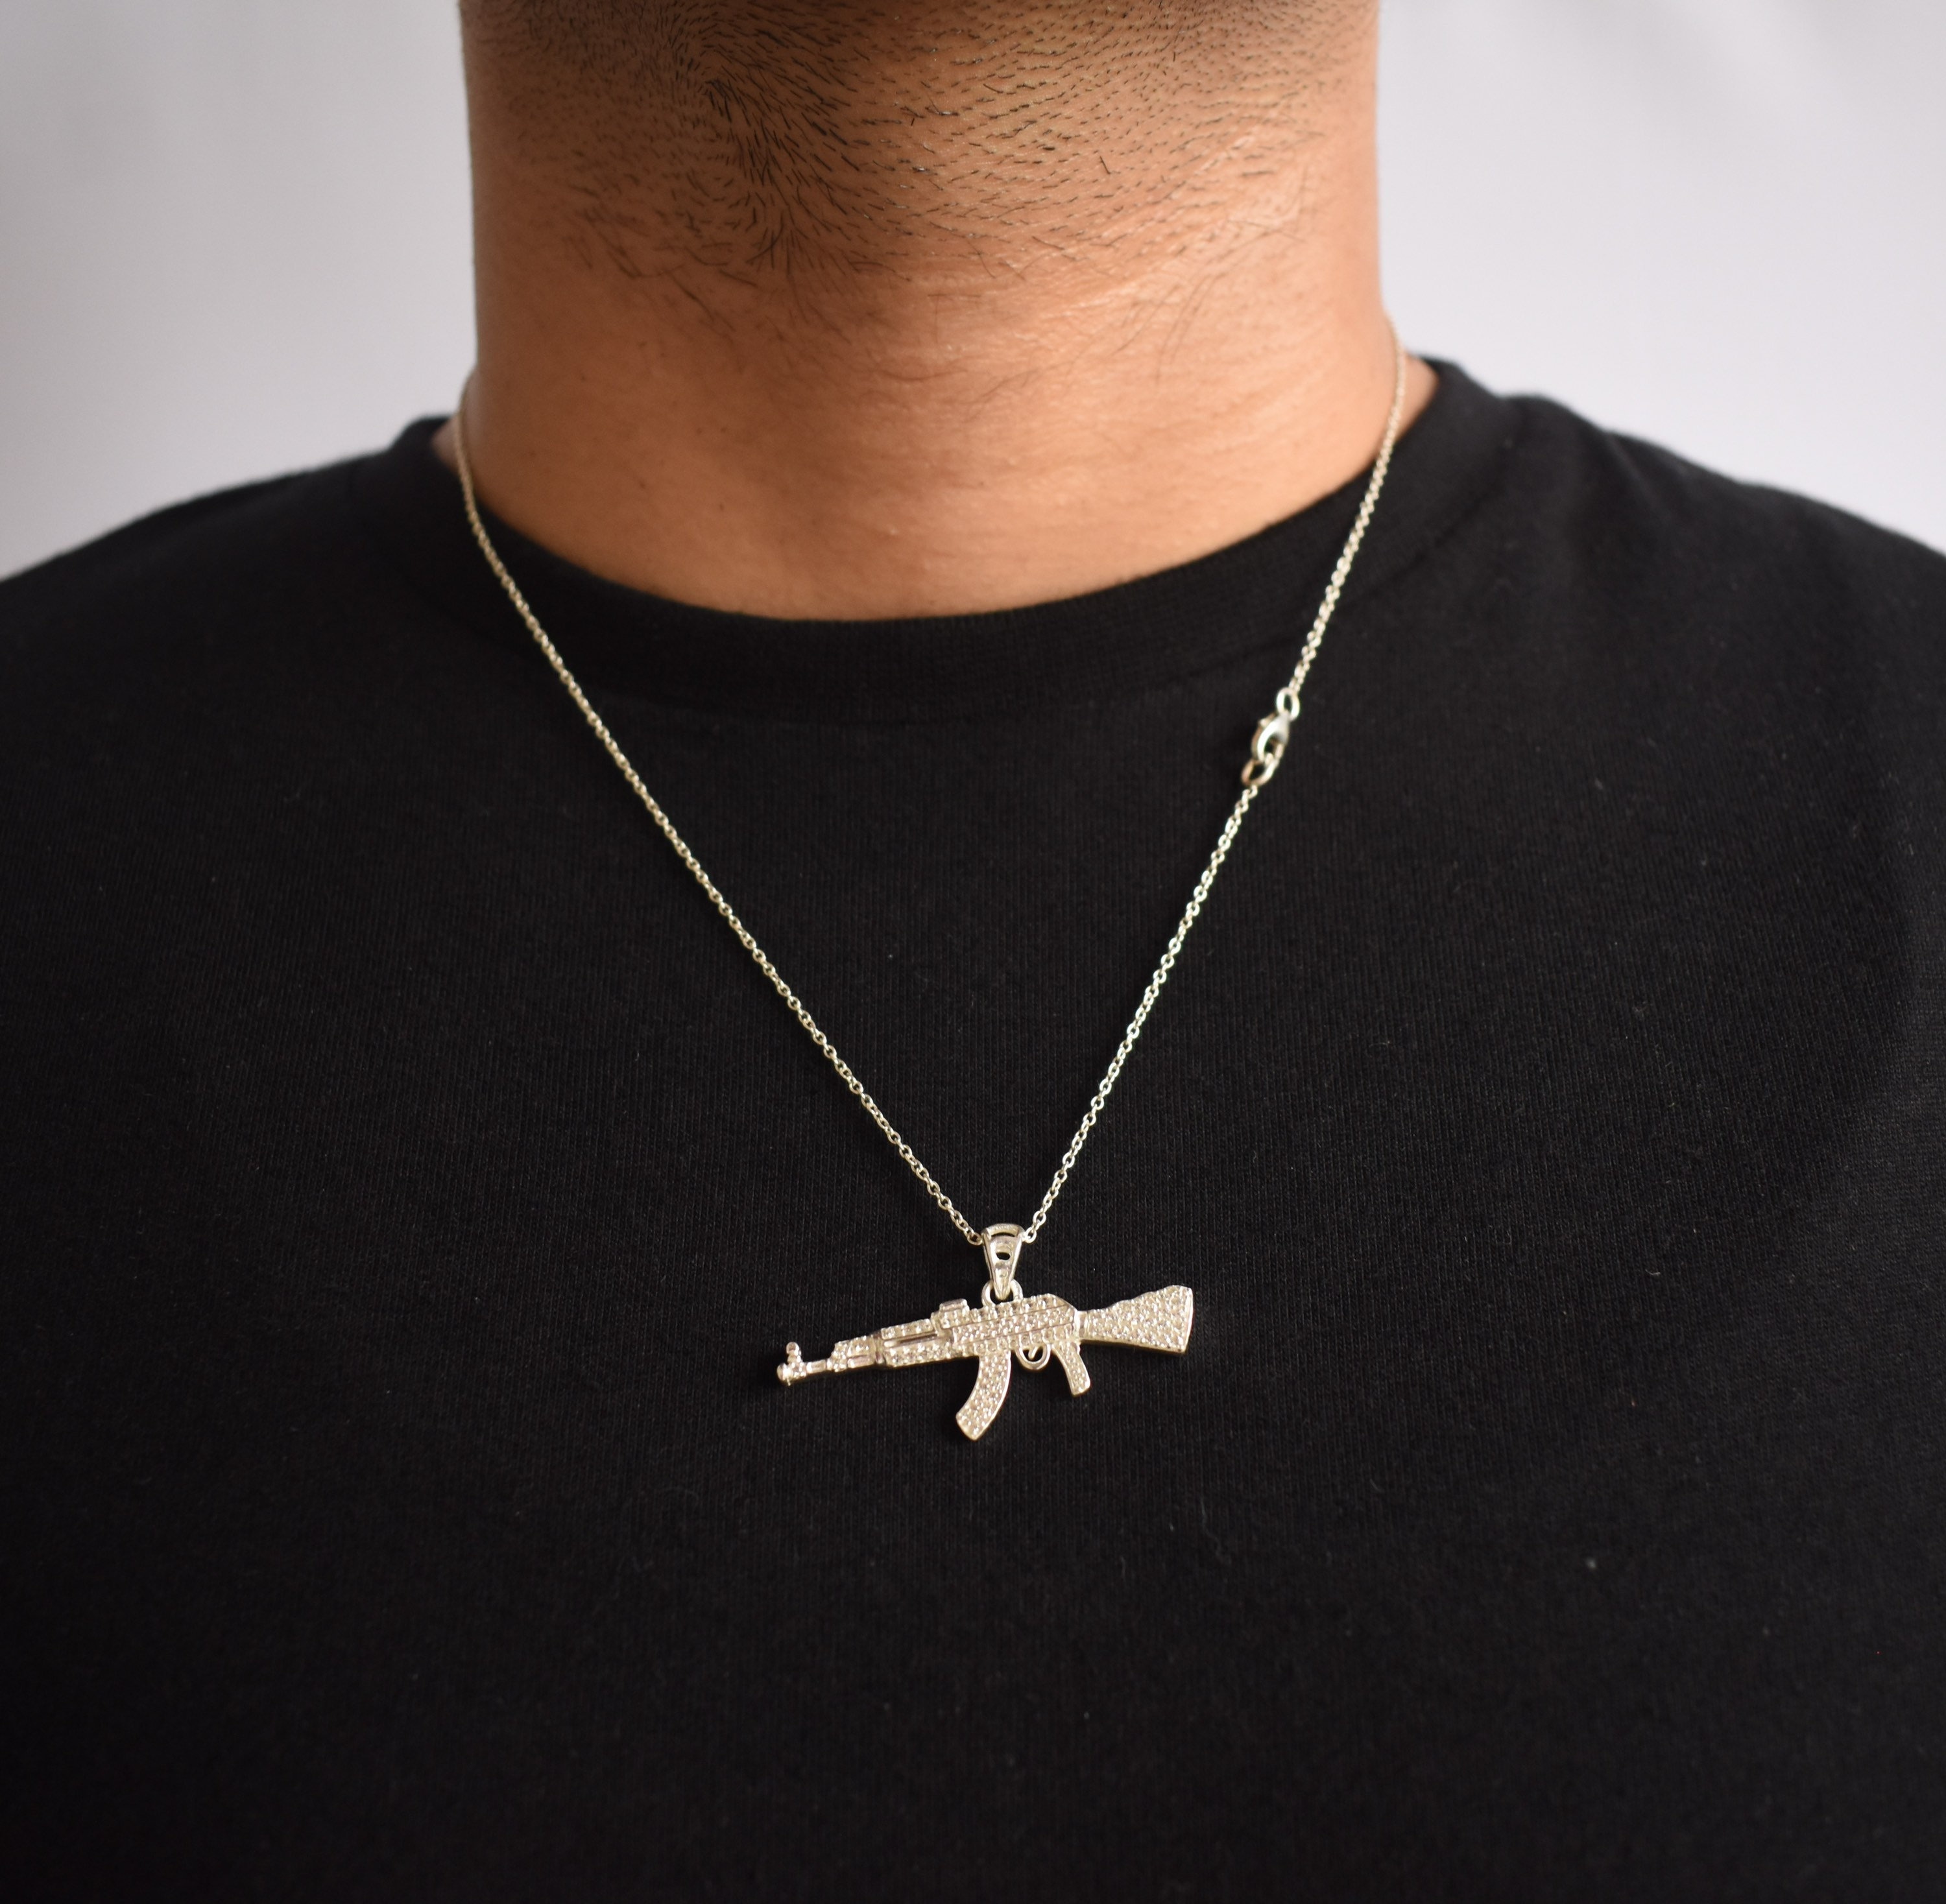 1pc Fashion Gold Ak47 Gun Shaped With Full Inlaid Pendant Necklace Suitable  For Men | SHEIN Malaysia